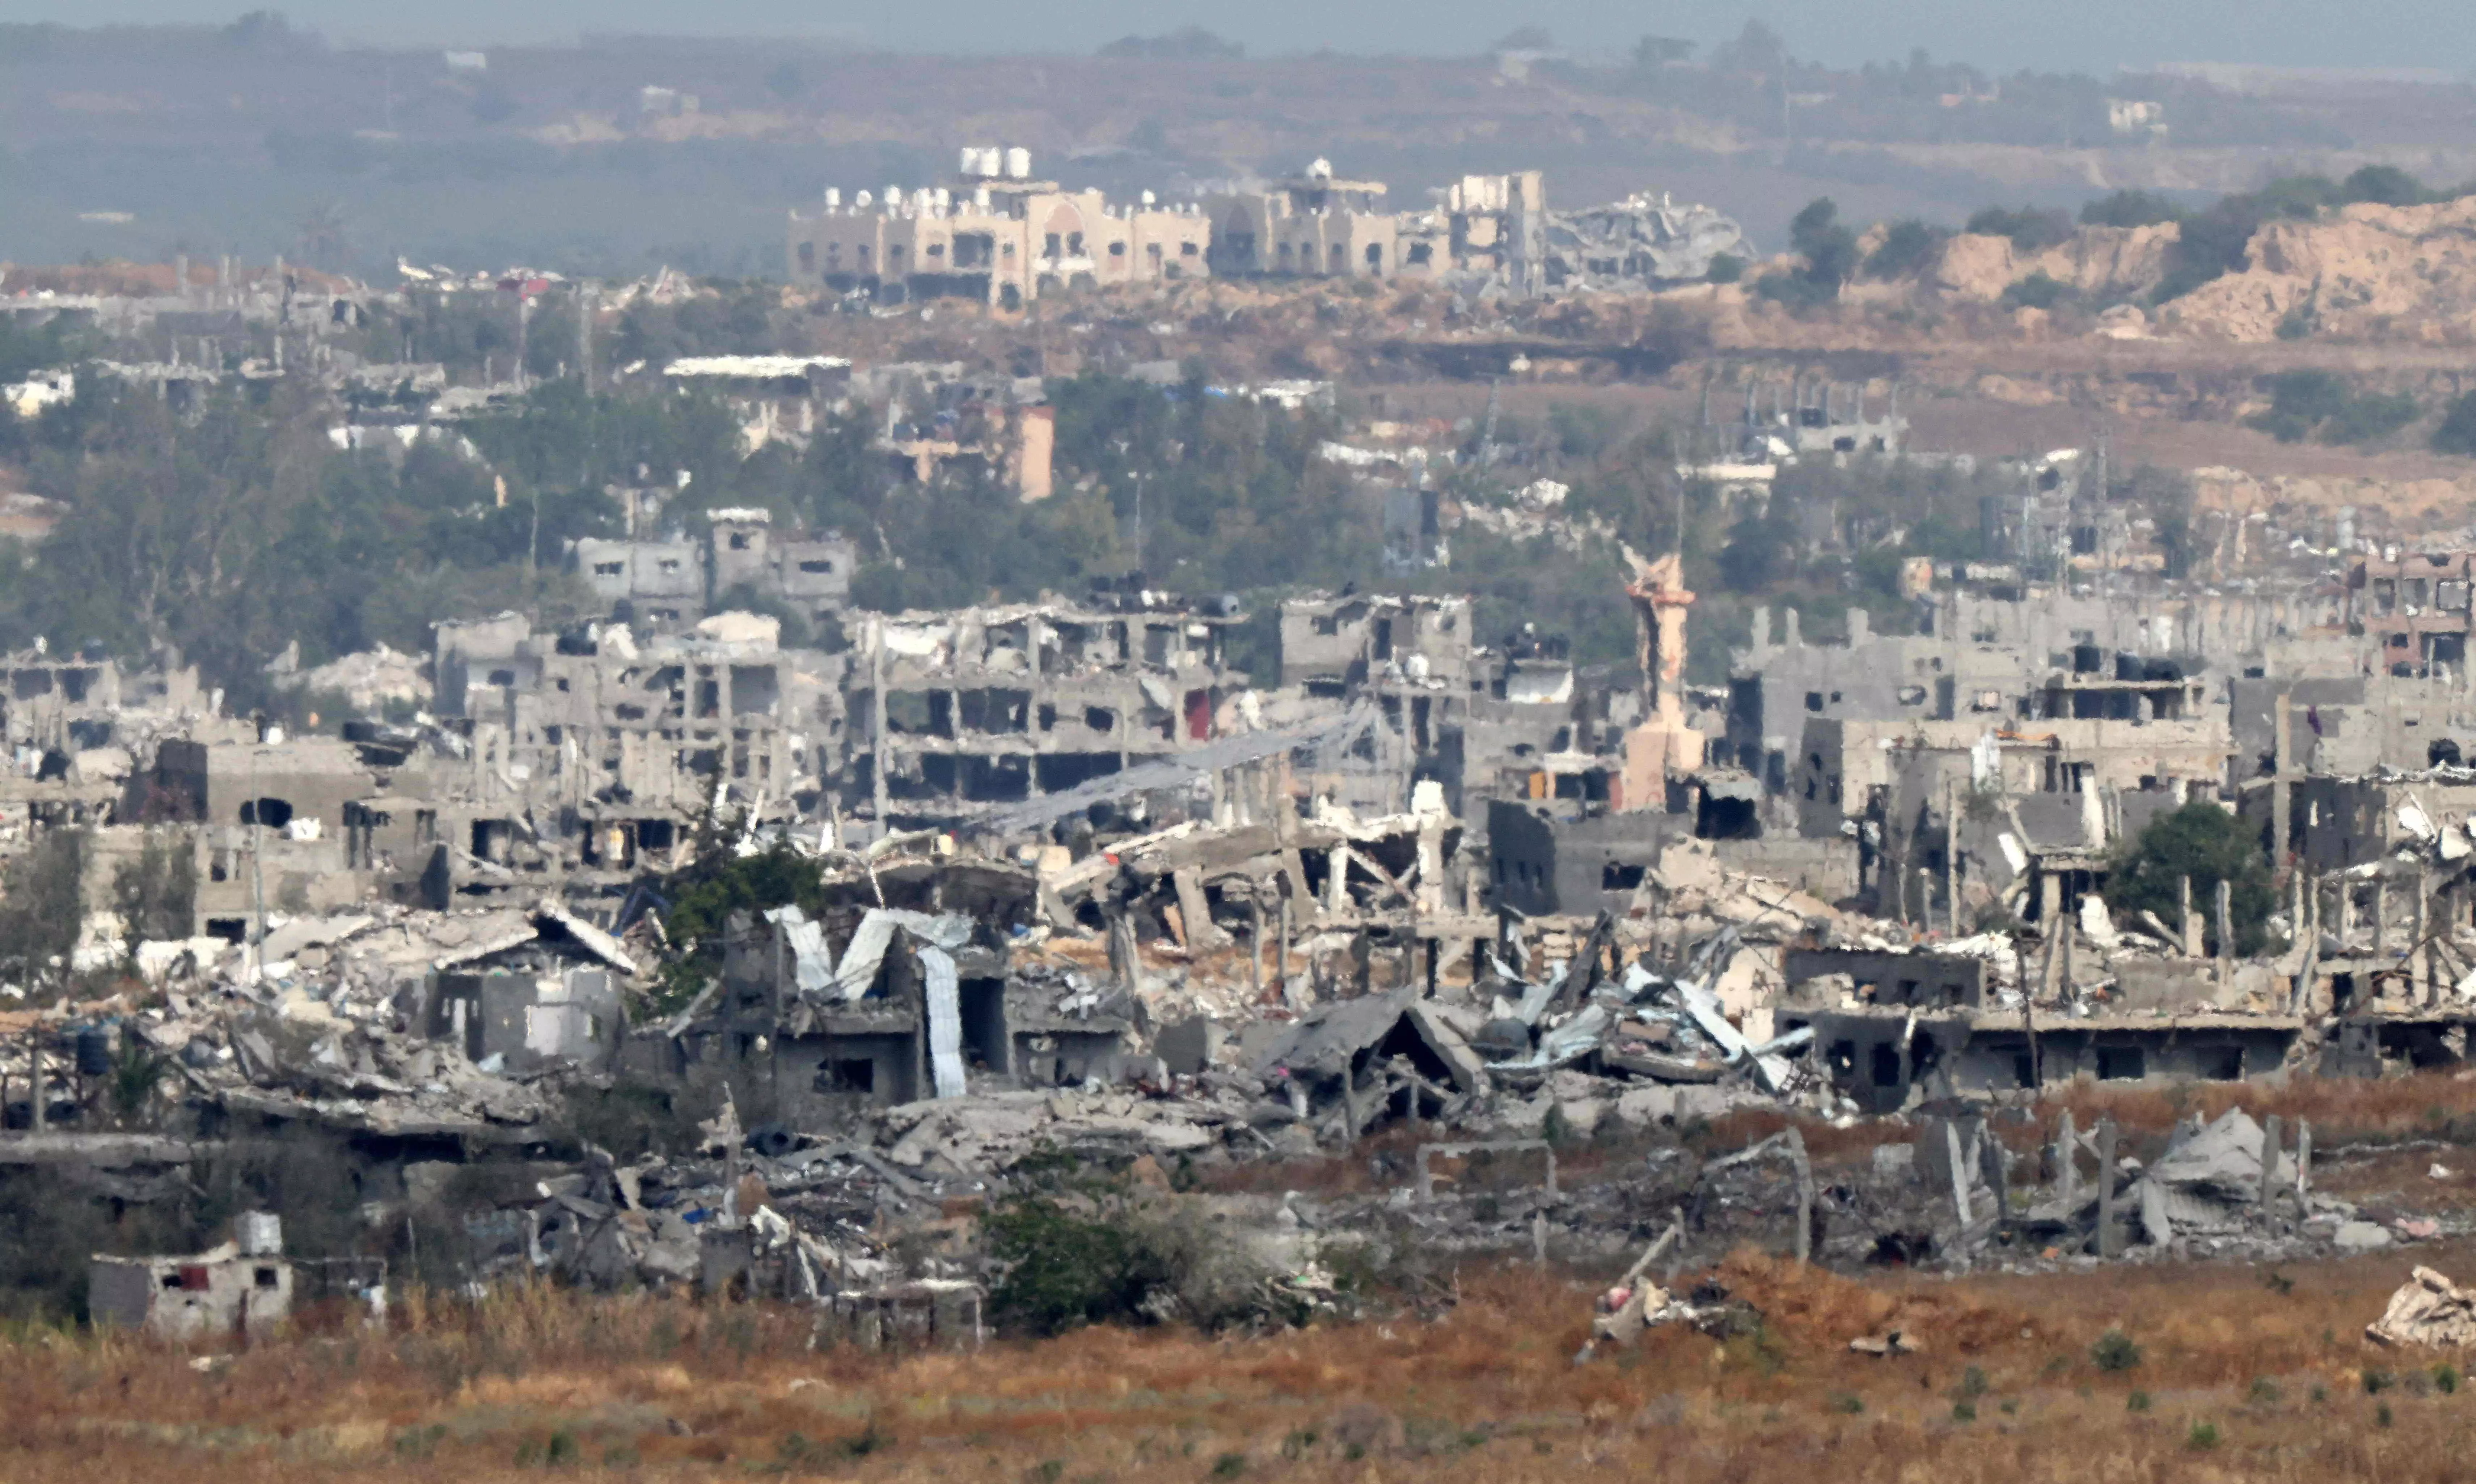 It Would Take Until 2040 to Repair All Homes Destroyed So Far in Gaza: UN Report